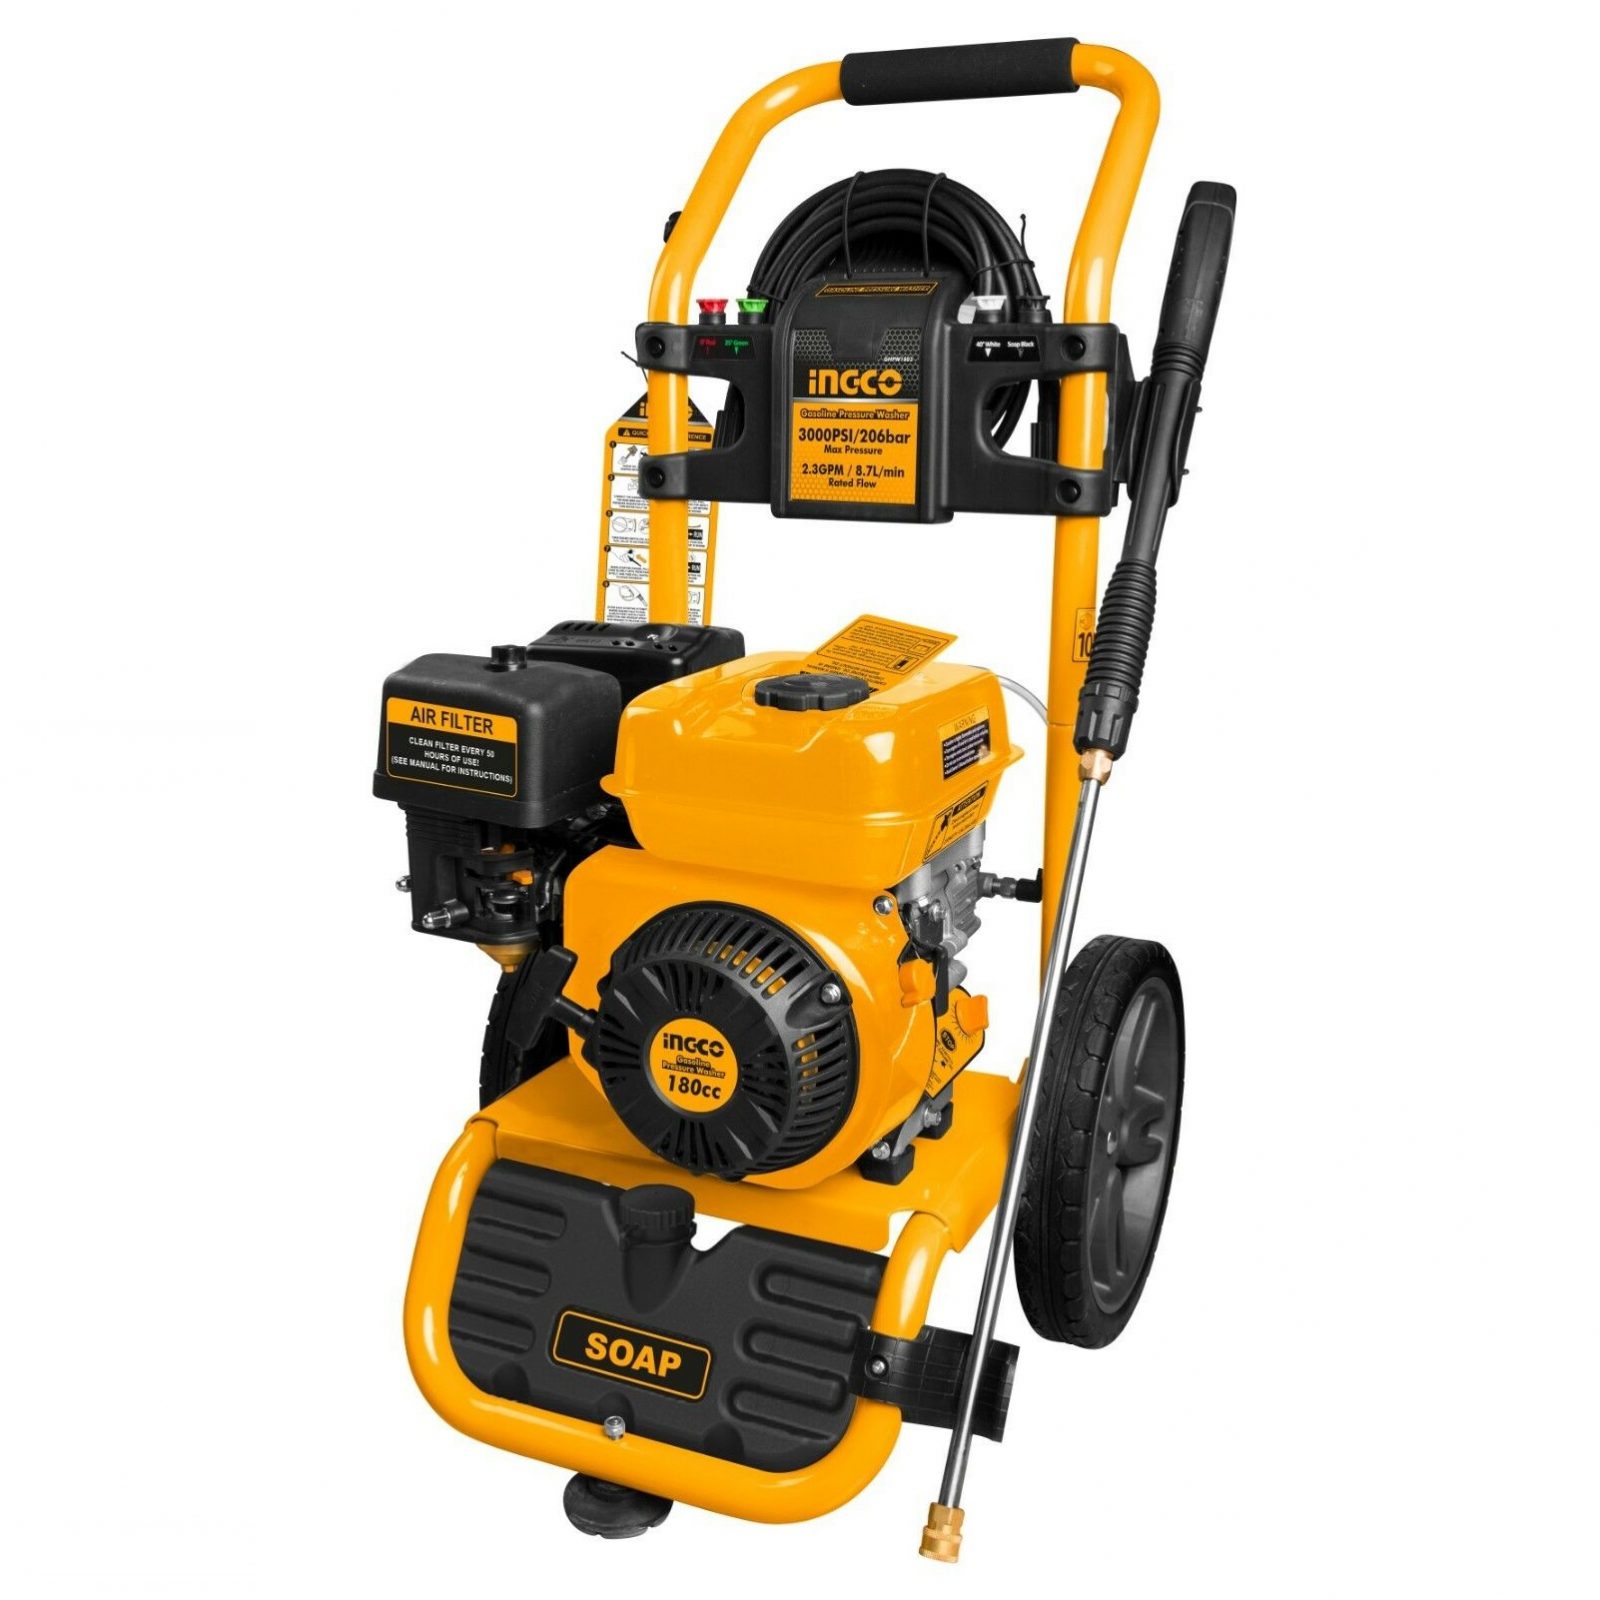 wolf power washer manual